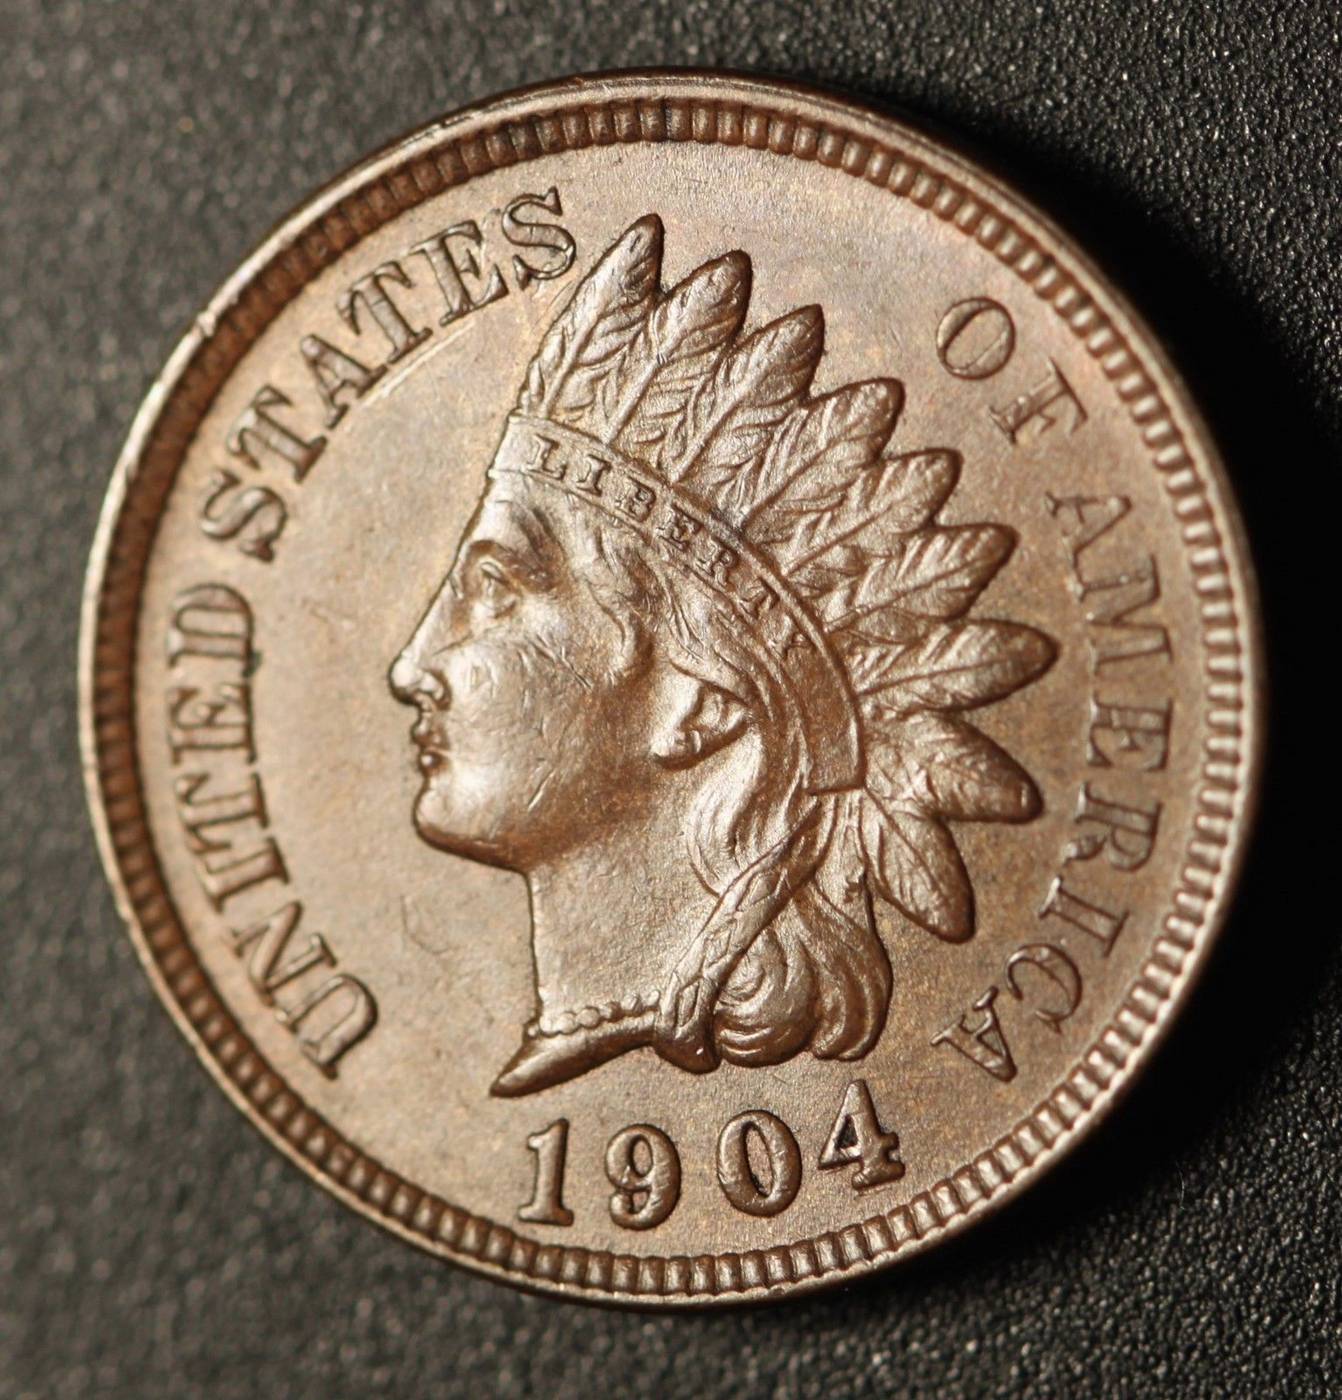 1904 RPD-015 - Indian Head Penny - Photo by Ed Nathanson